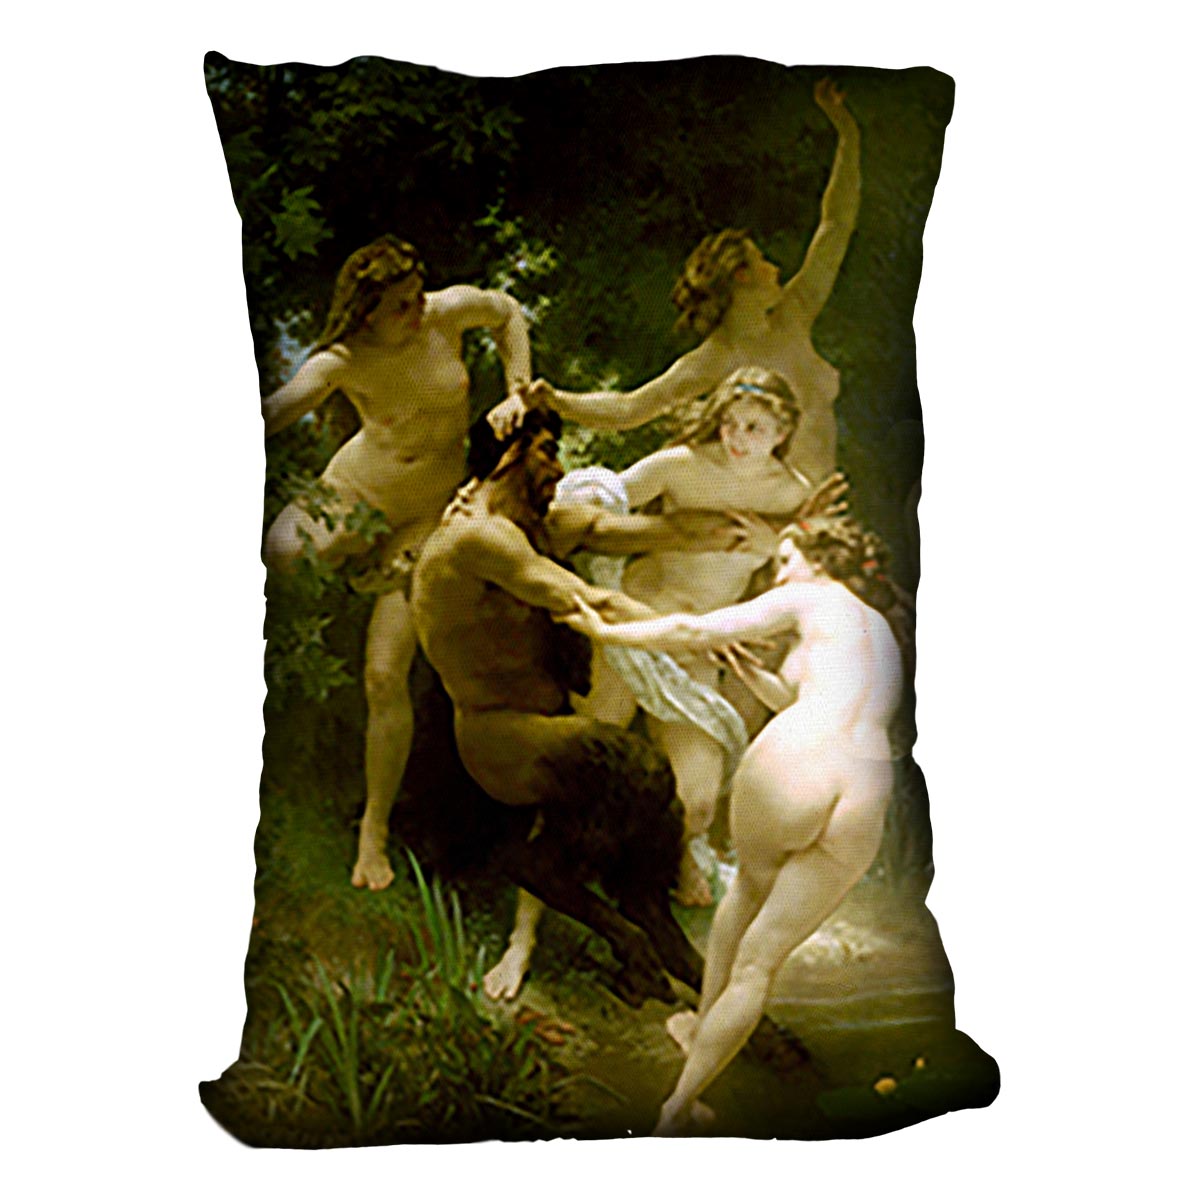 Nymphs and Satyr By Bouguereau Cushion